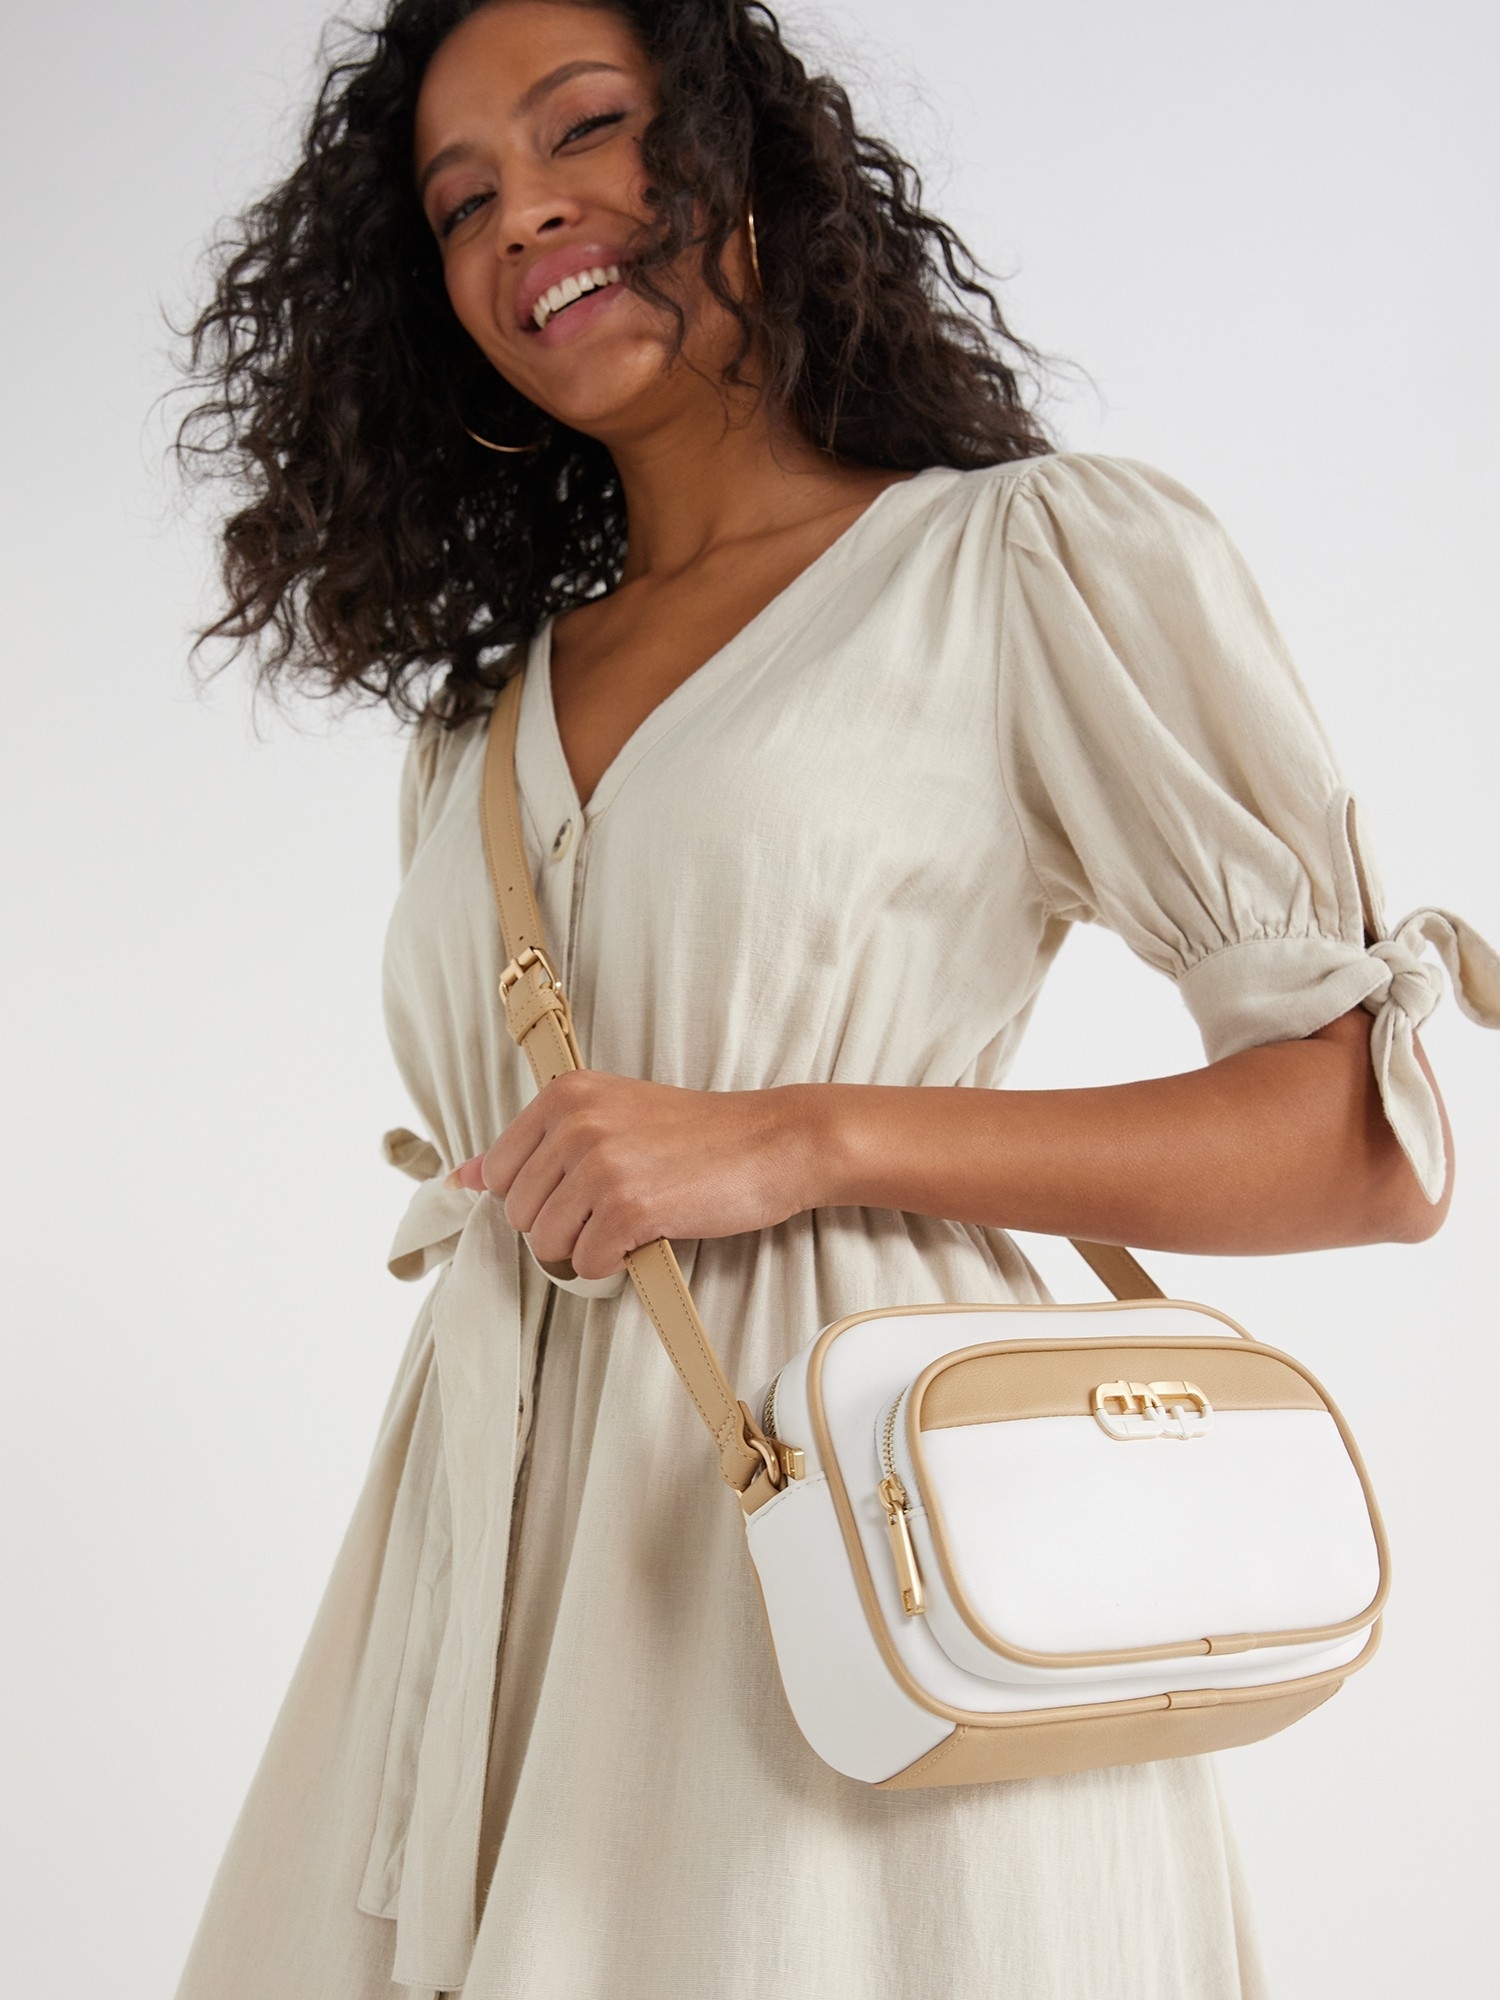 Smiling model in a stylish dress posing with a white crossbody bag